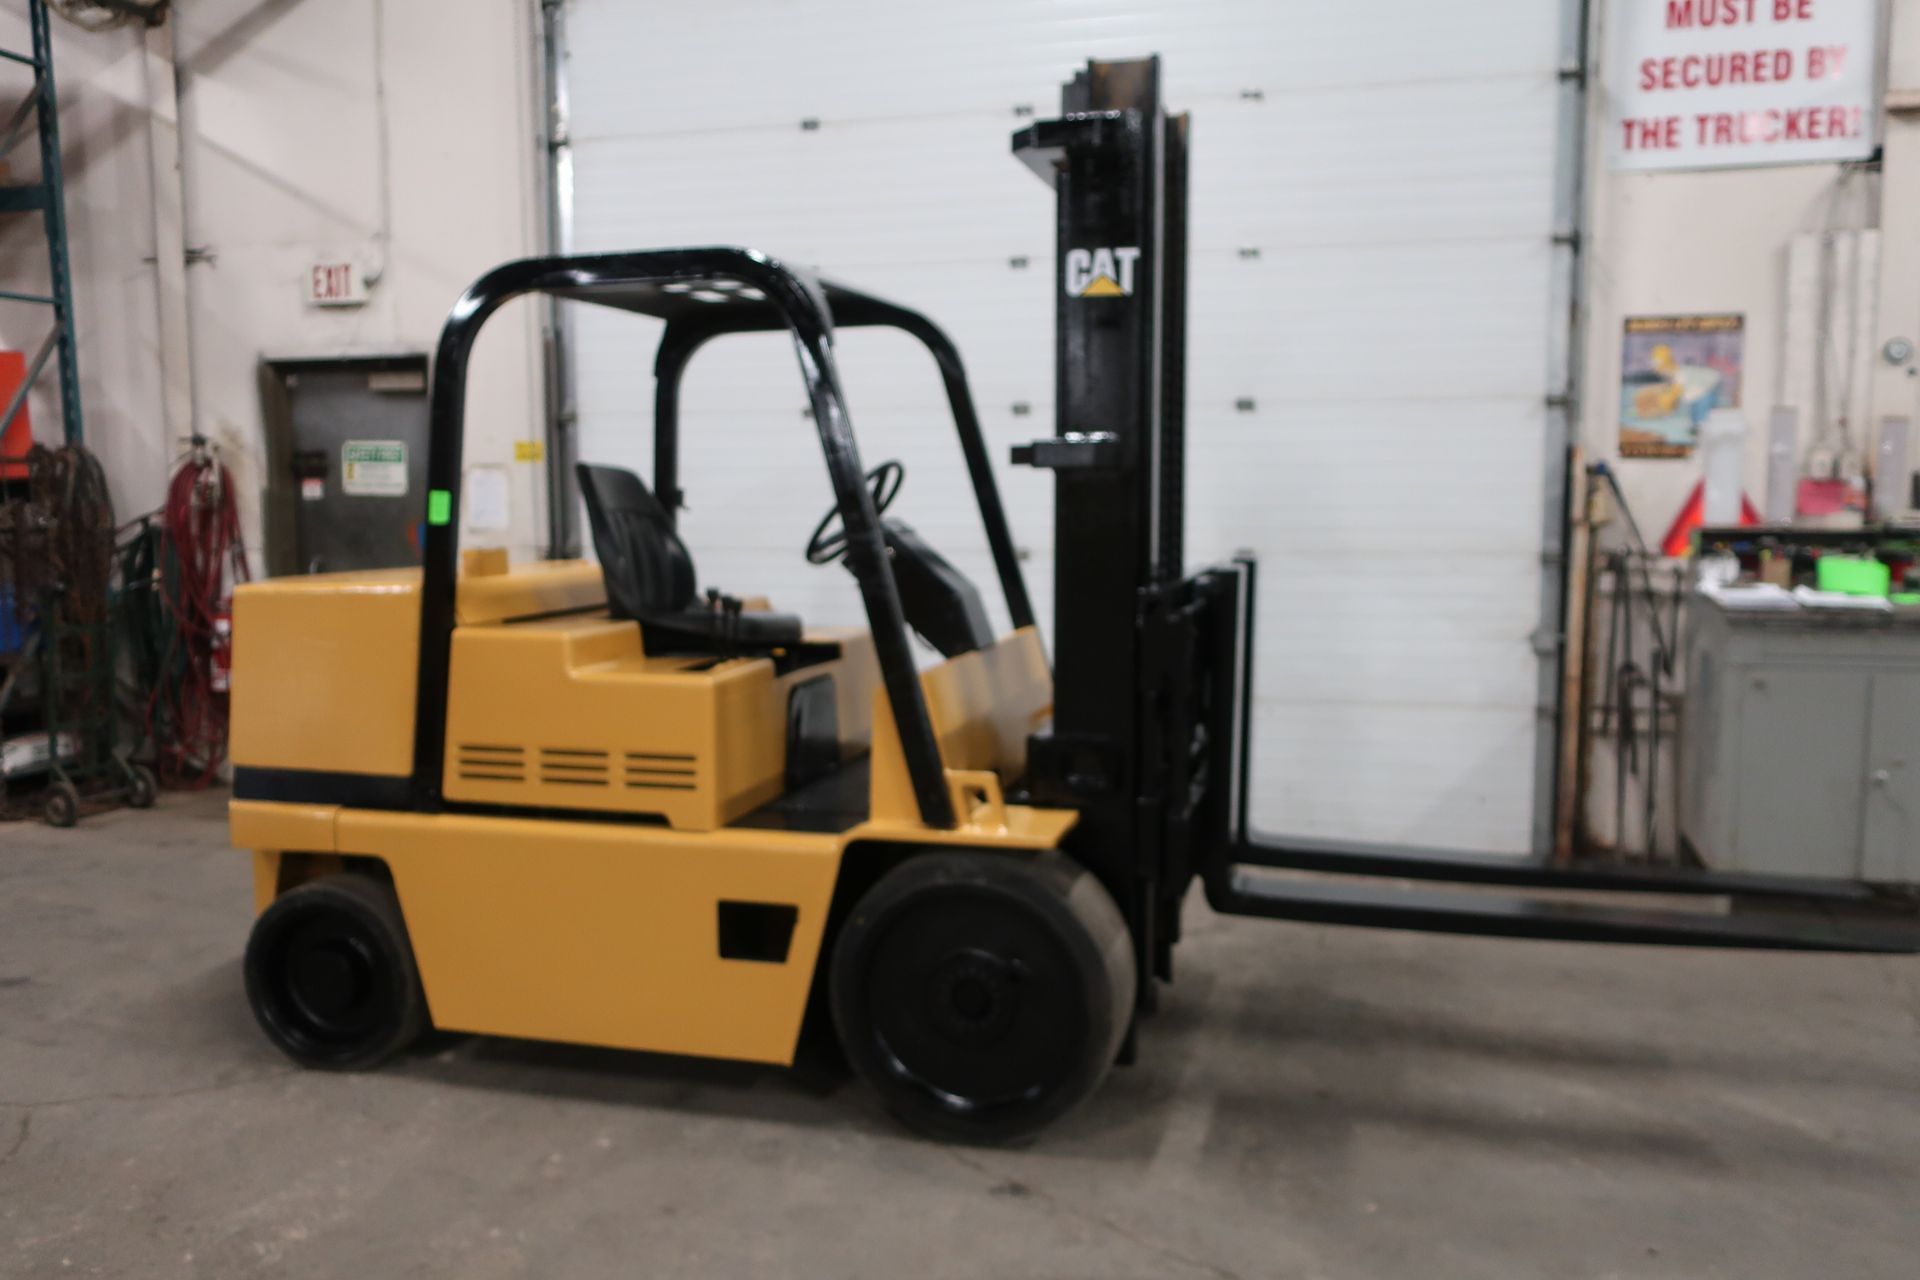 FREE CUSTOMS- CAT 13500lbs Capacity Forklift with LOW HOURS & 58" forks with SIDESHIFT - GAS unit